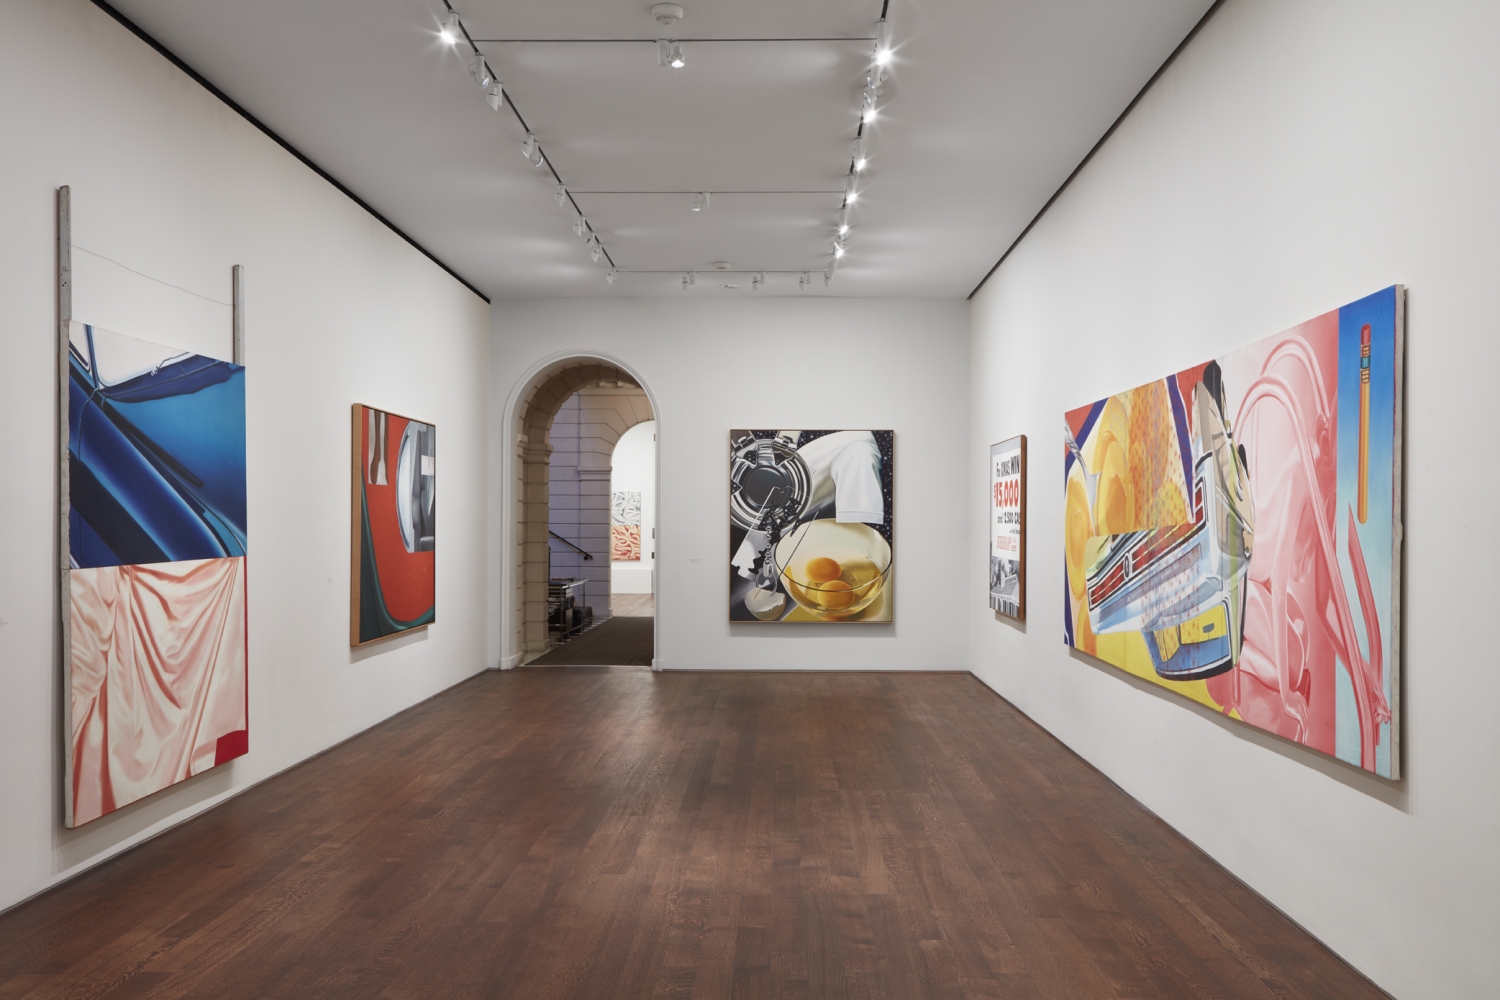 Installation view of James Rosenquist: His American Life, October 25 - December 7, 2018. © Estate of James Rosenquist / Licensed by VAGA at ARS, New York.